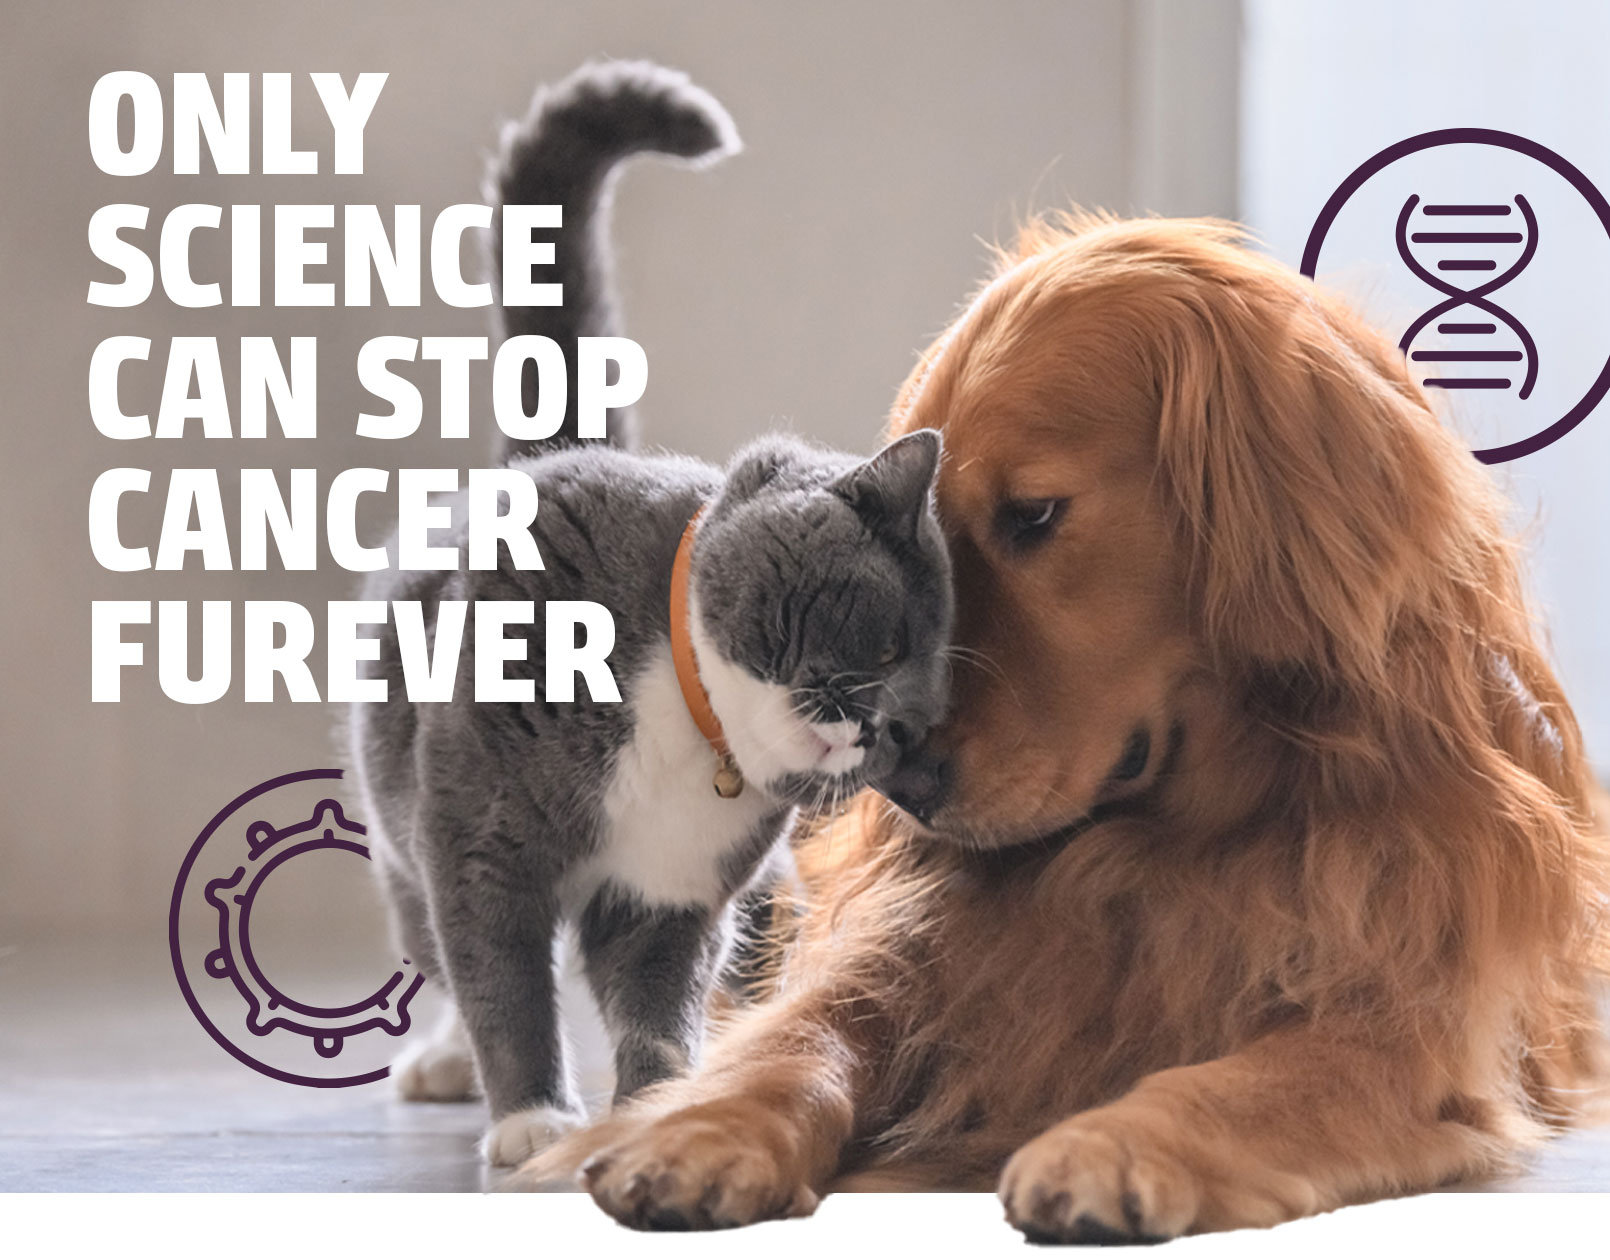 Only Science Can Stop Cancer Furever